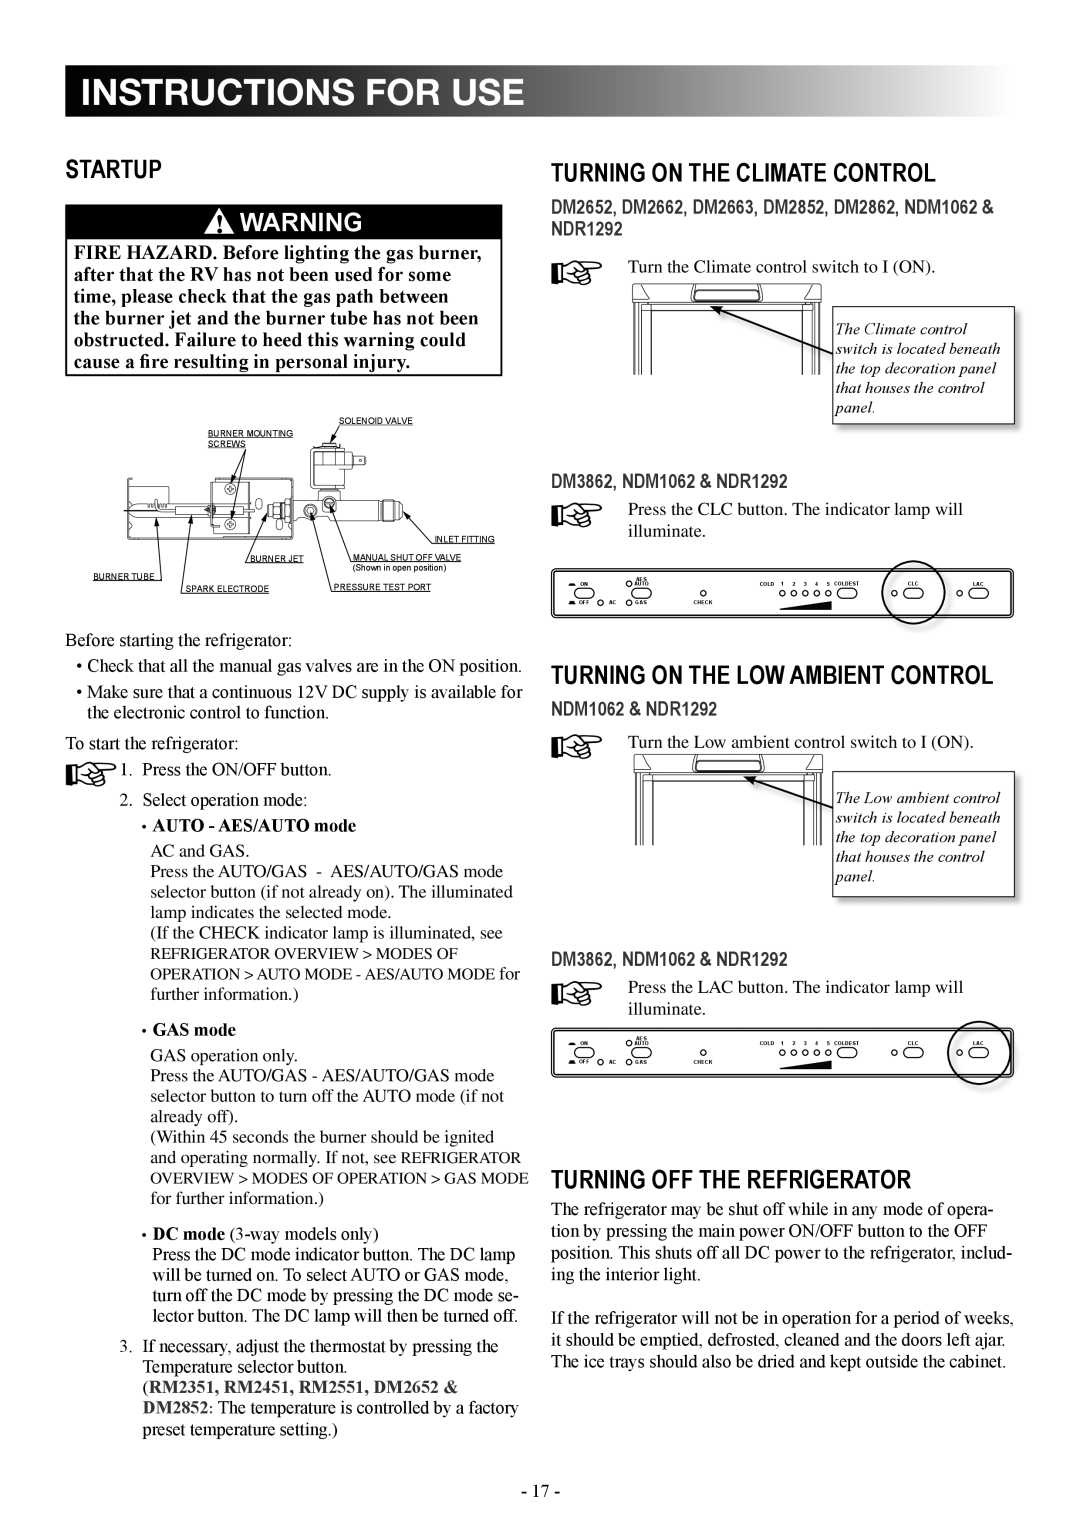 Dometic DM2862 instructions for use, Startup, 6! warning, Turning on the climate control, turning off the refrigerator 